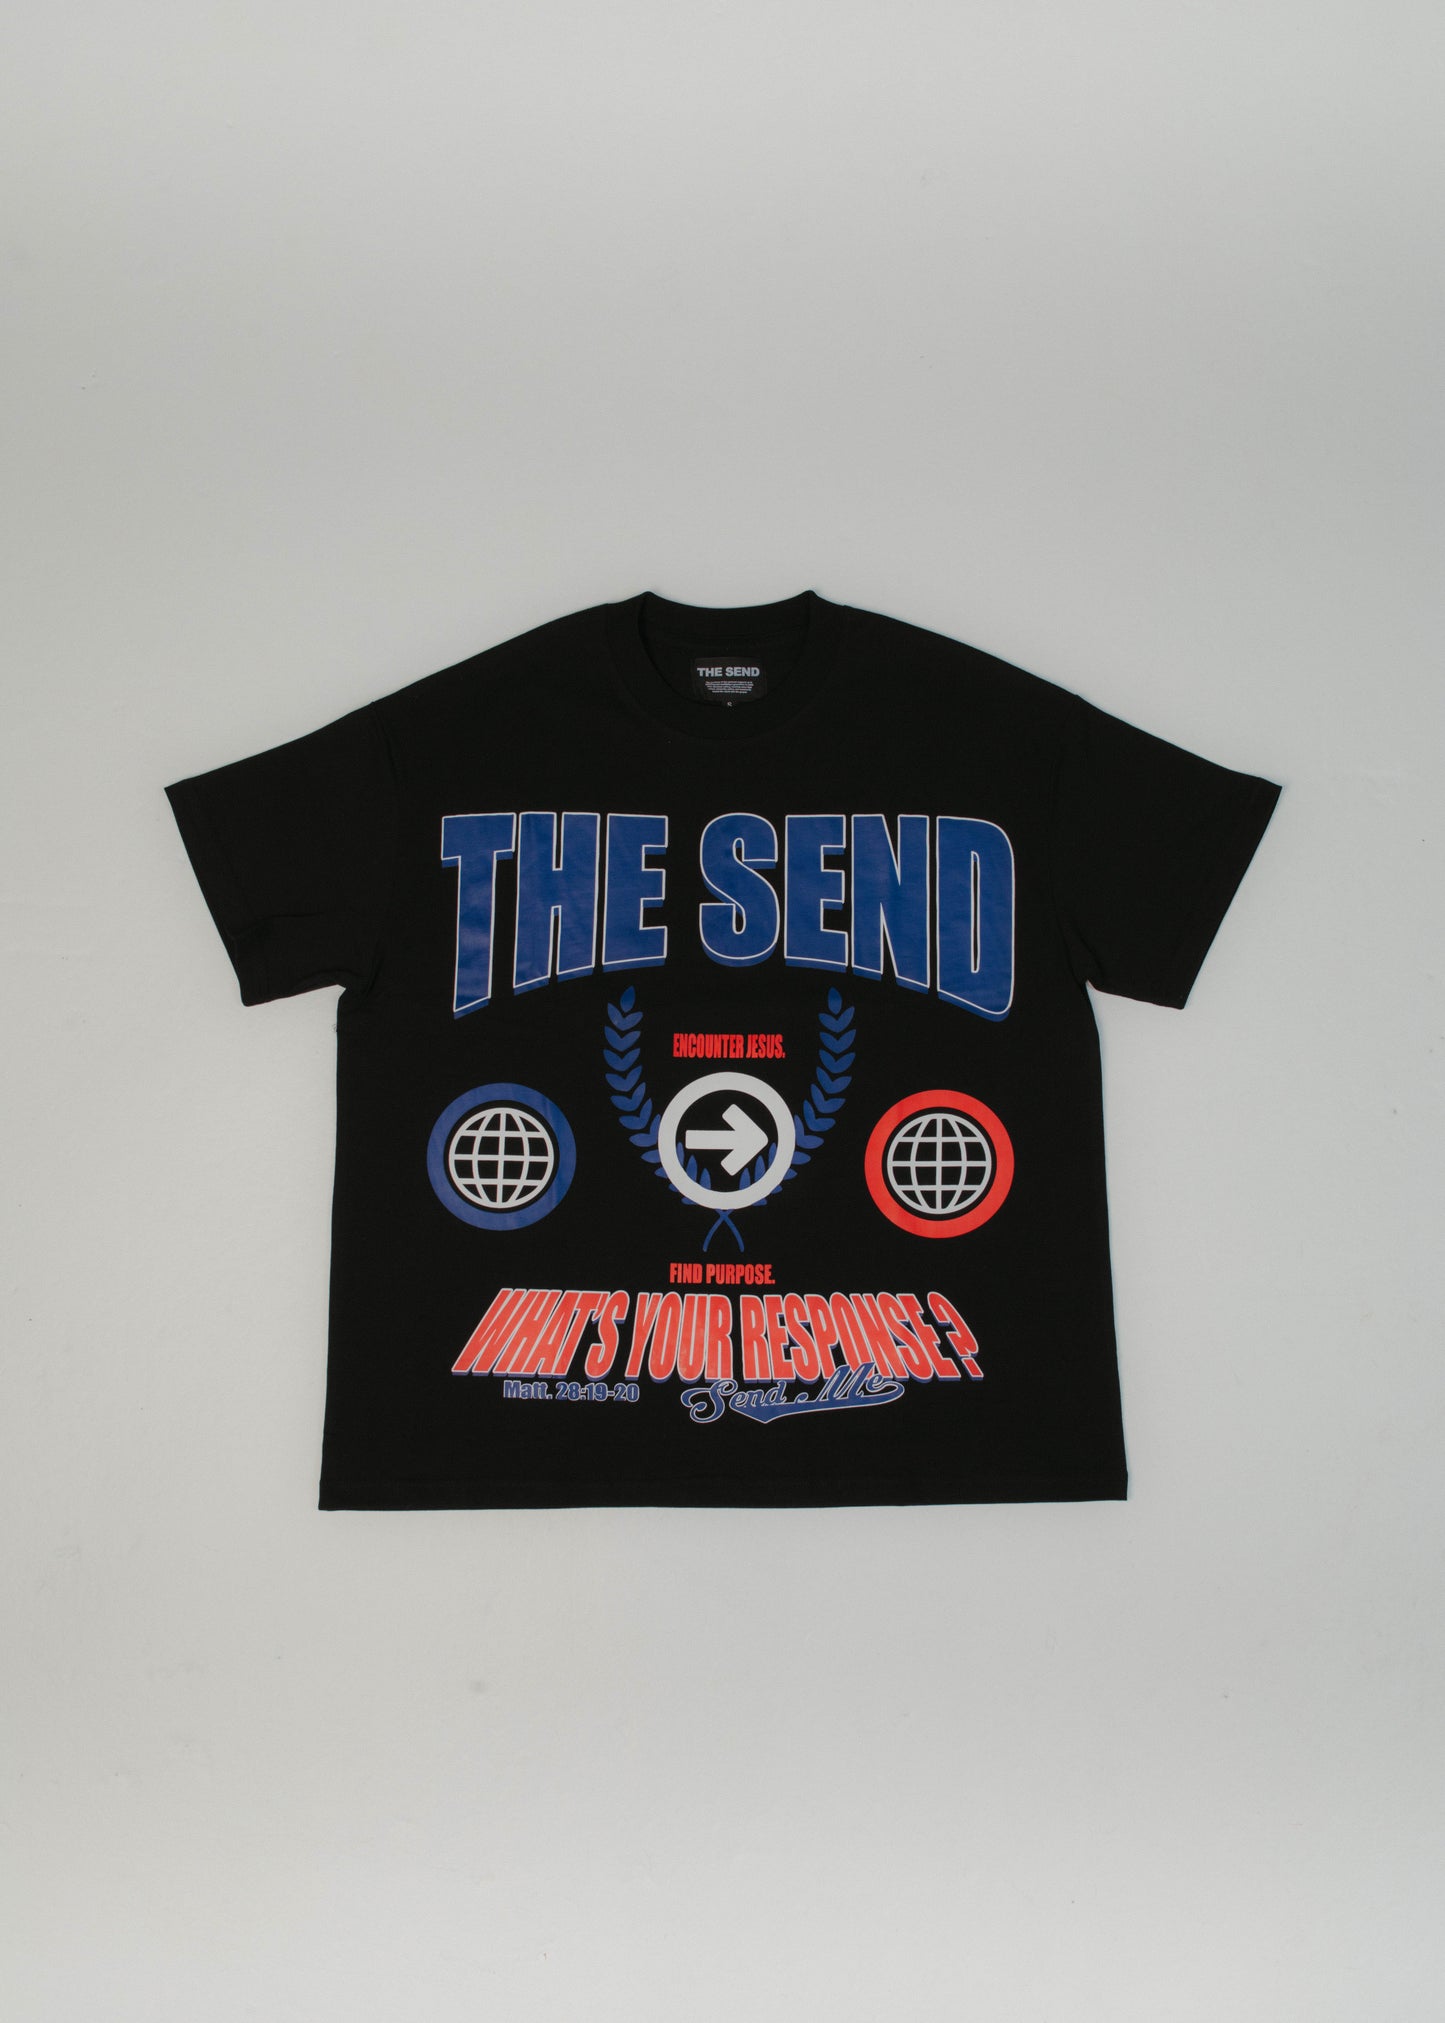 The Send T-Shirt “What’s Your Response?” *Youth*